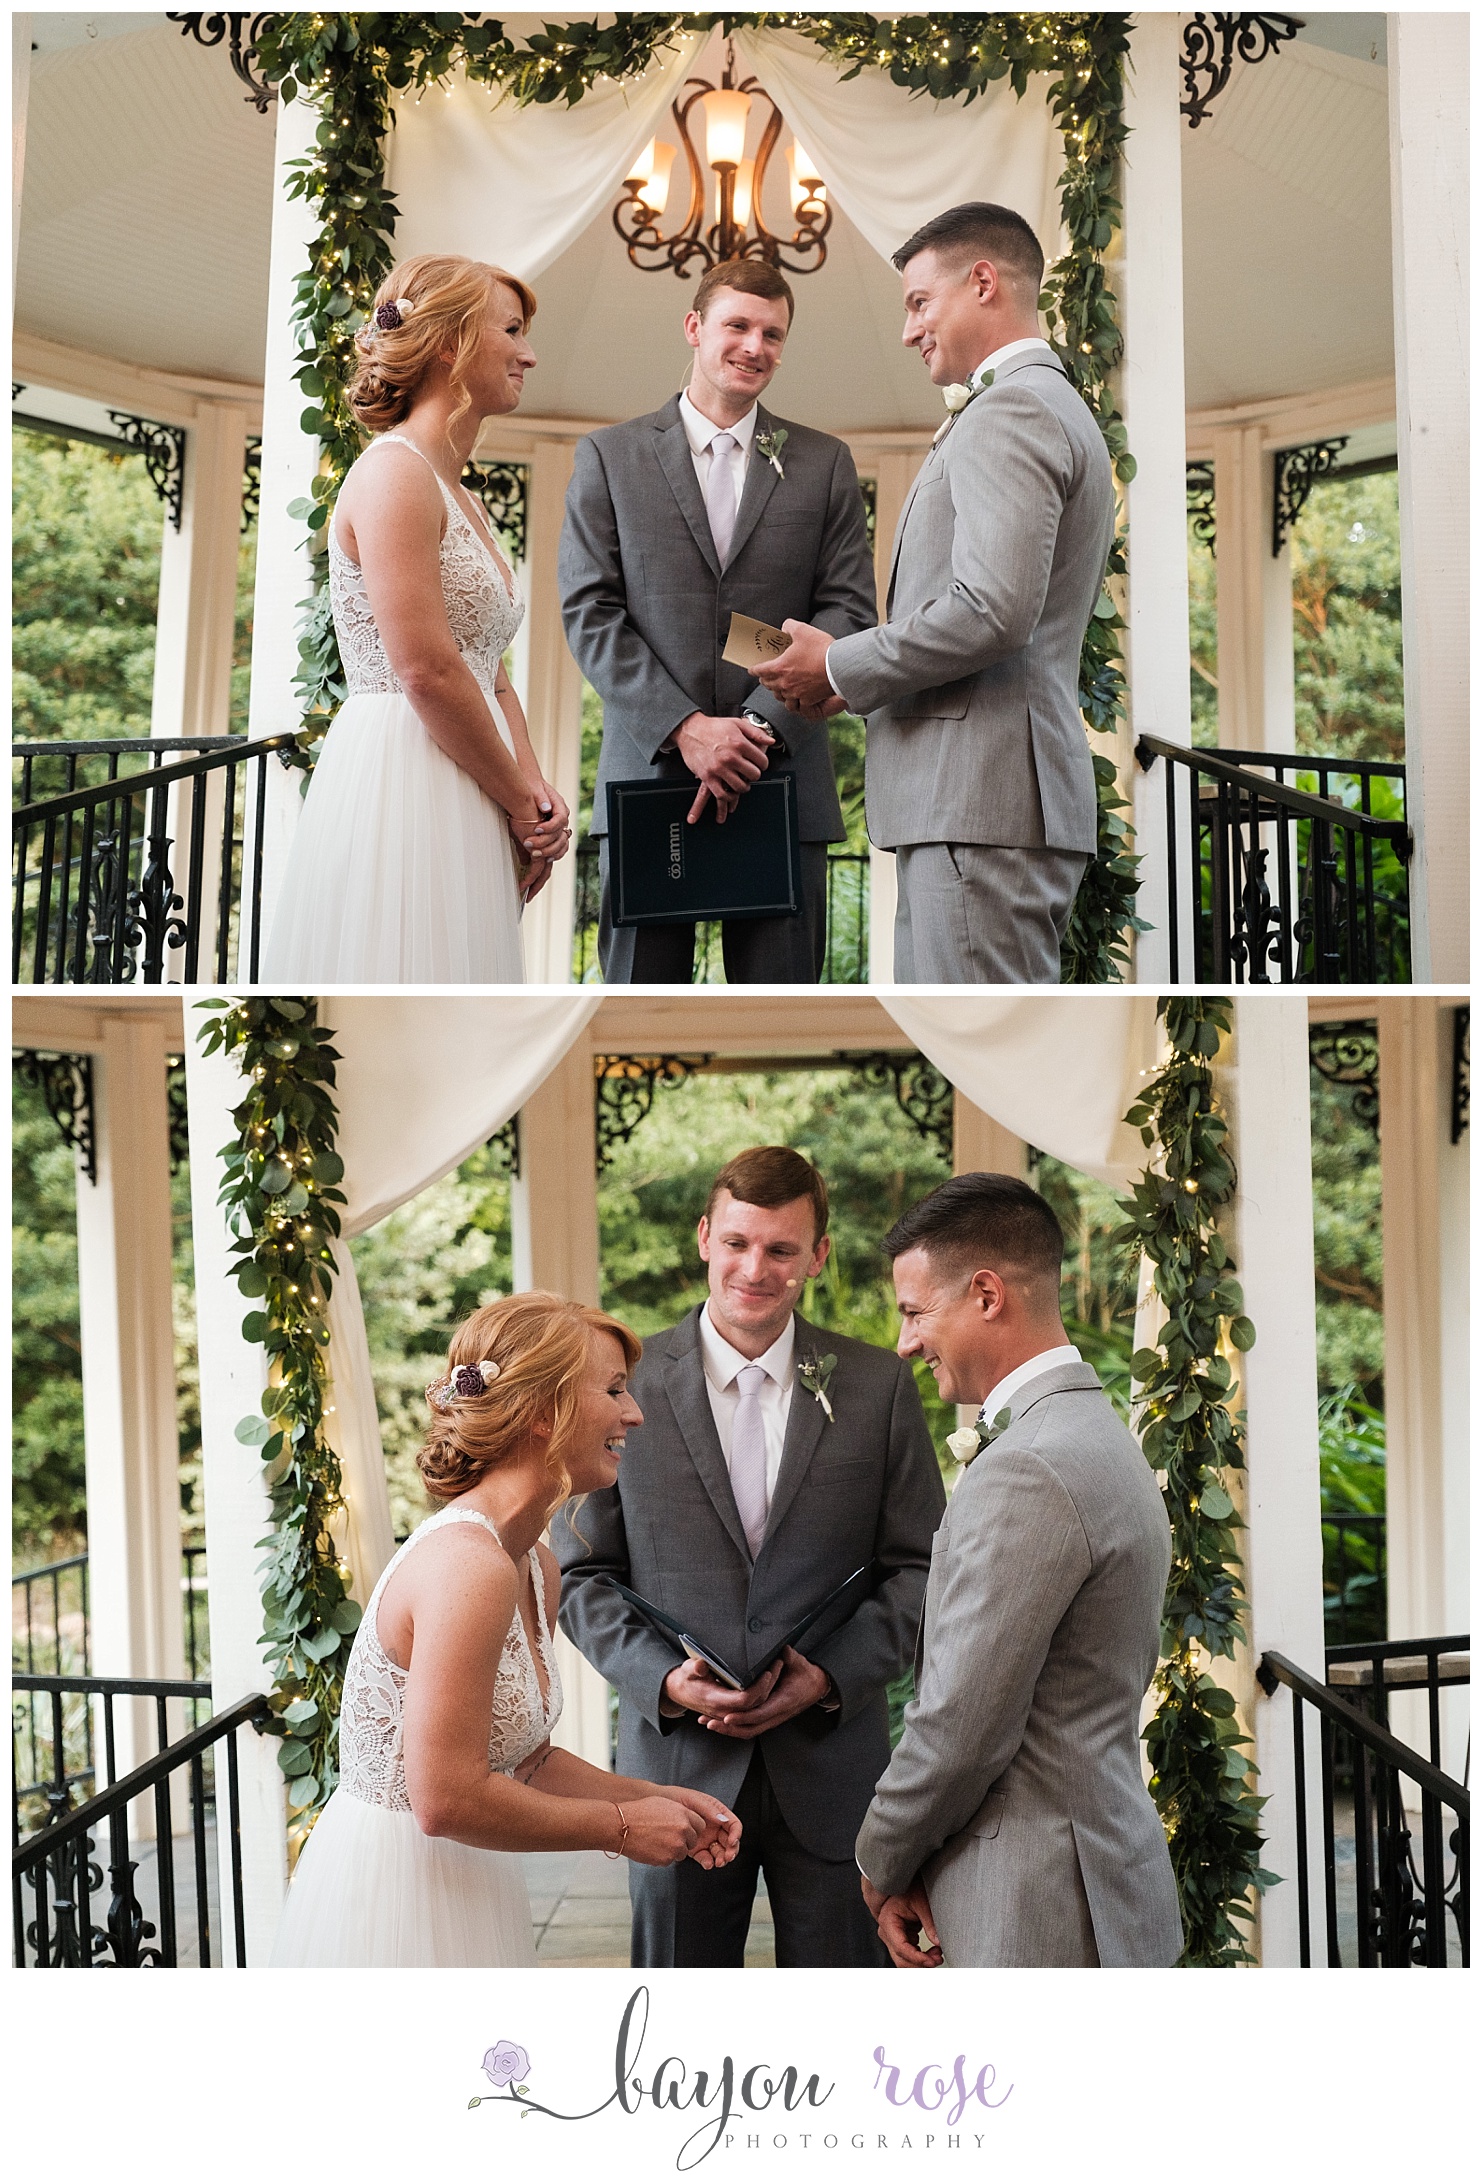 Groom reads his vows under the gazebo at The Gatehouse Baton Rouge